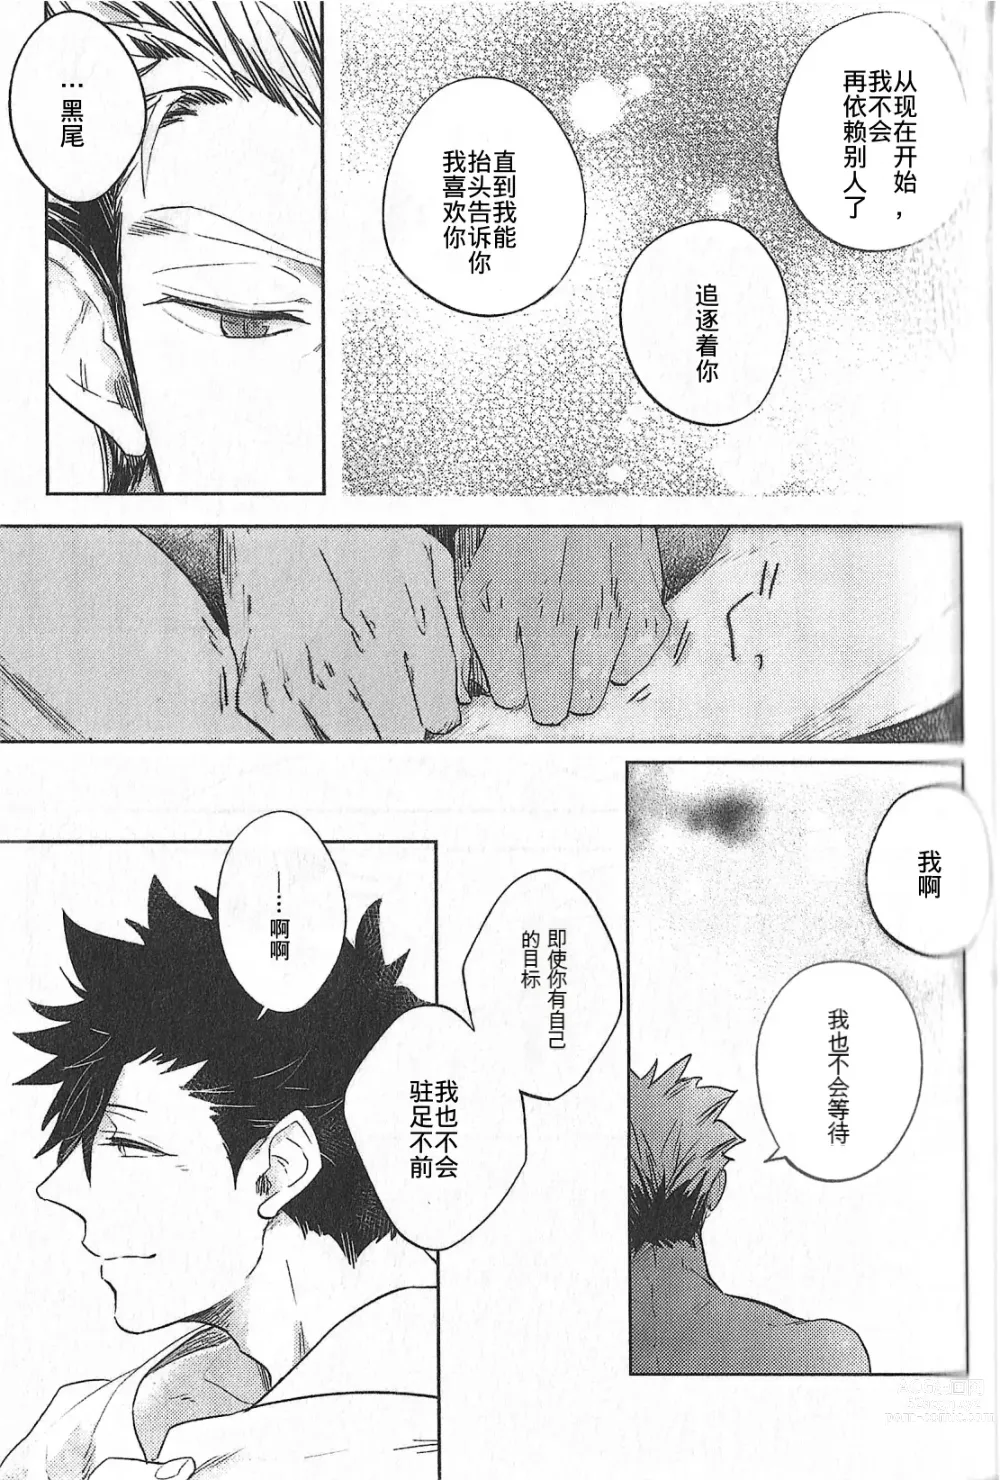 Page 16 of doujinshi 极境的野兽 后篇